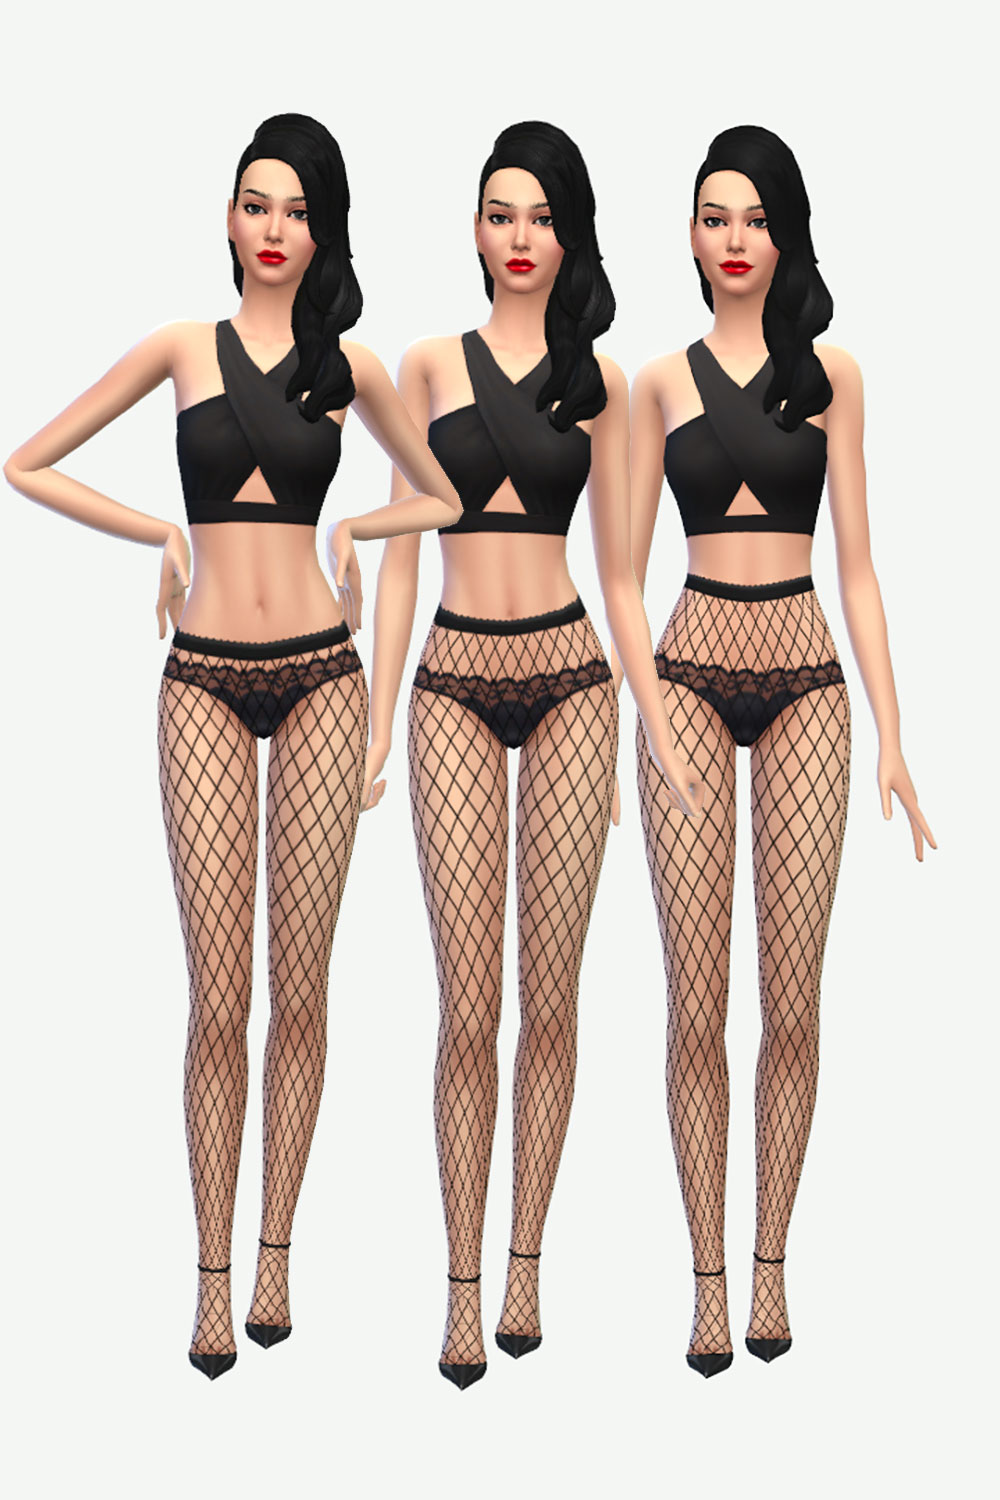 The Sims 4 Fishnet Tights CC